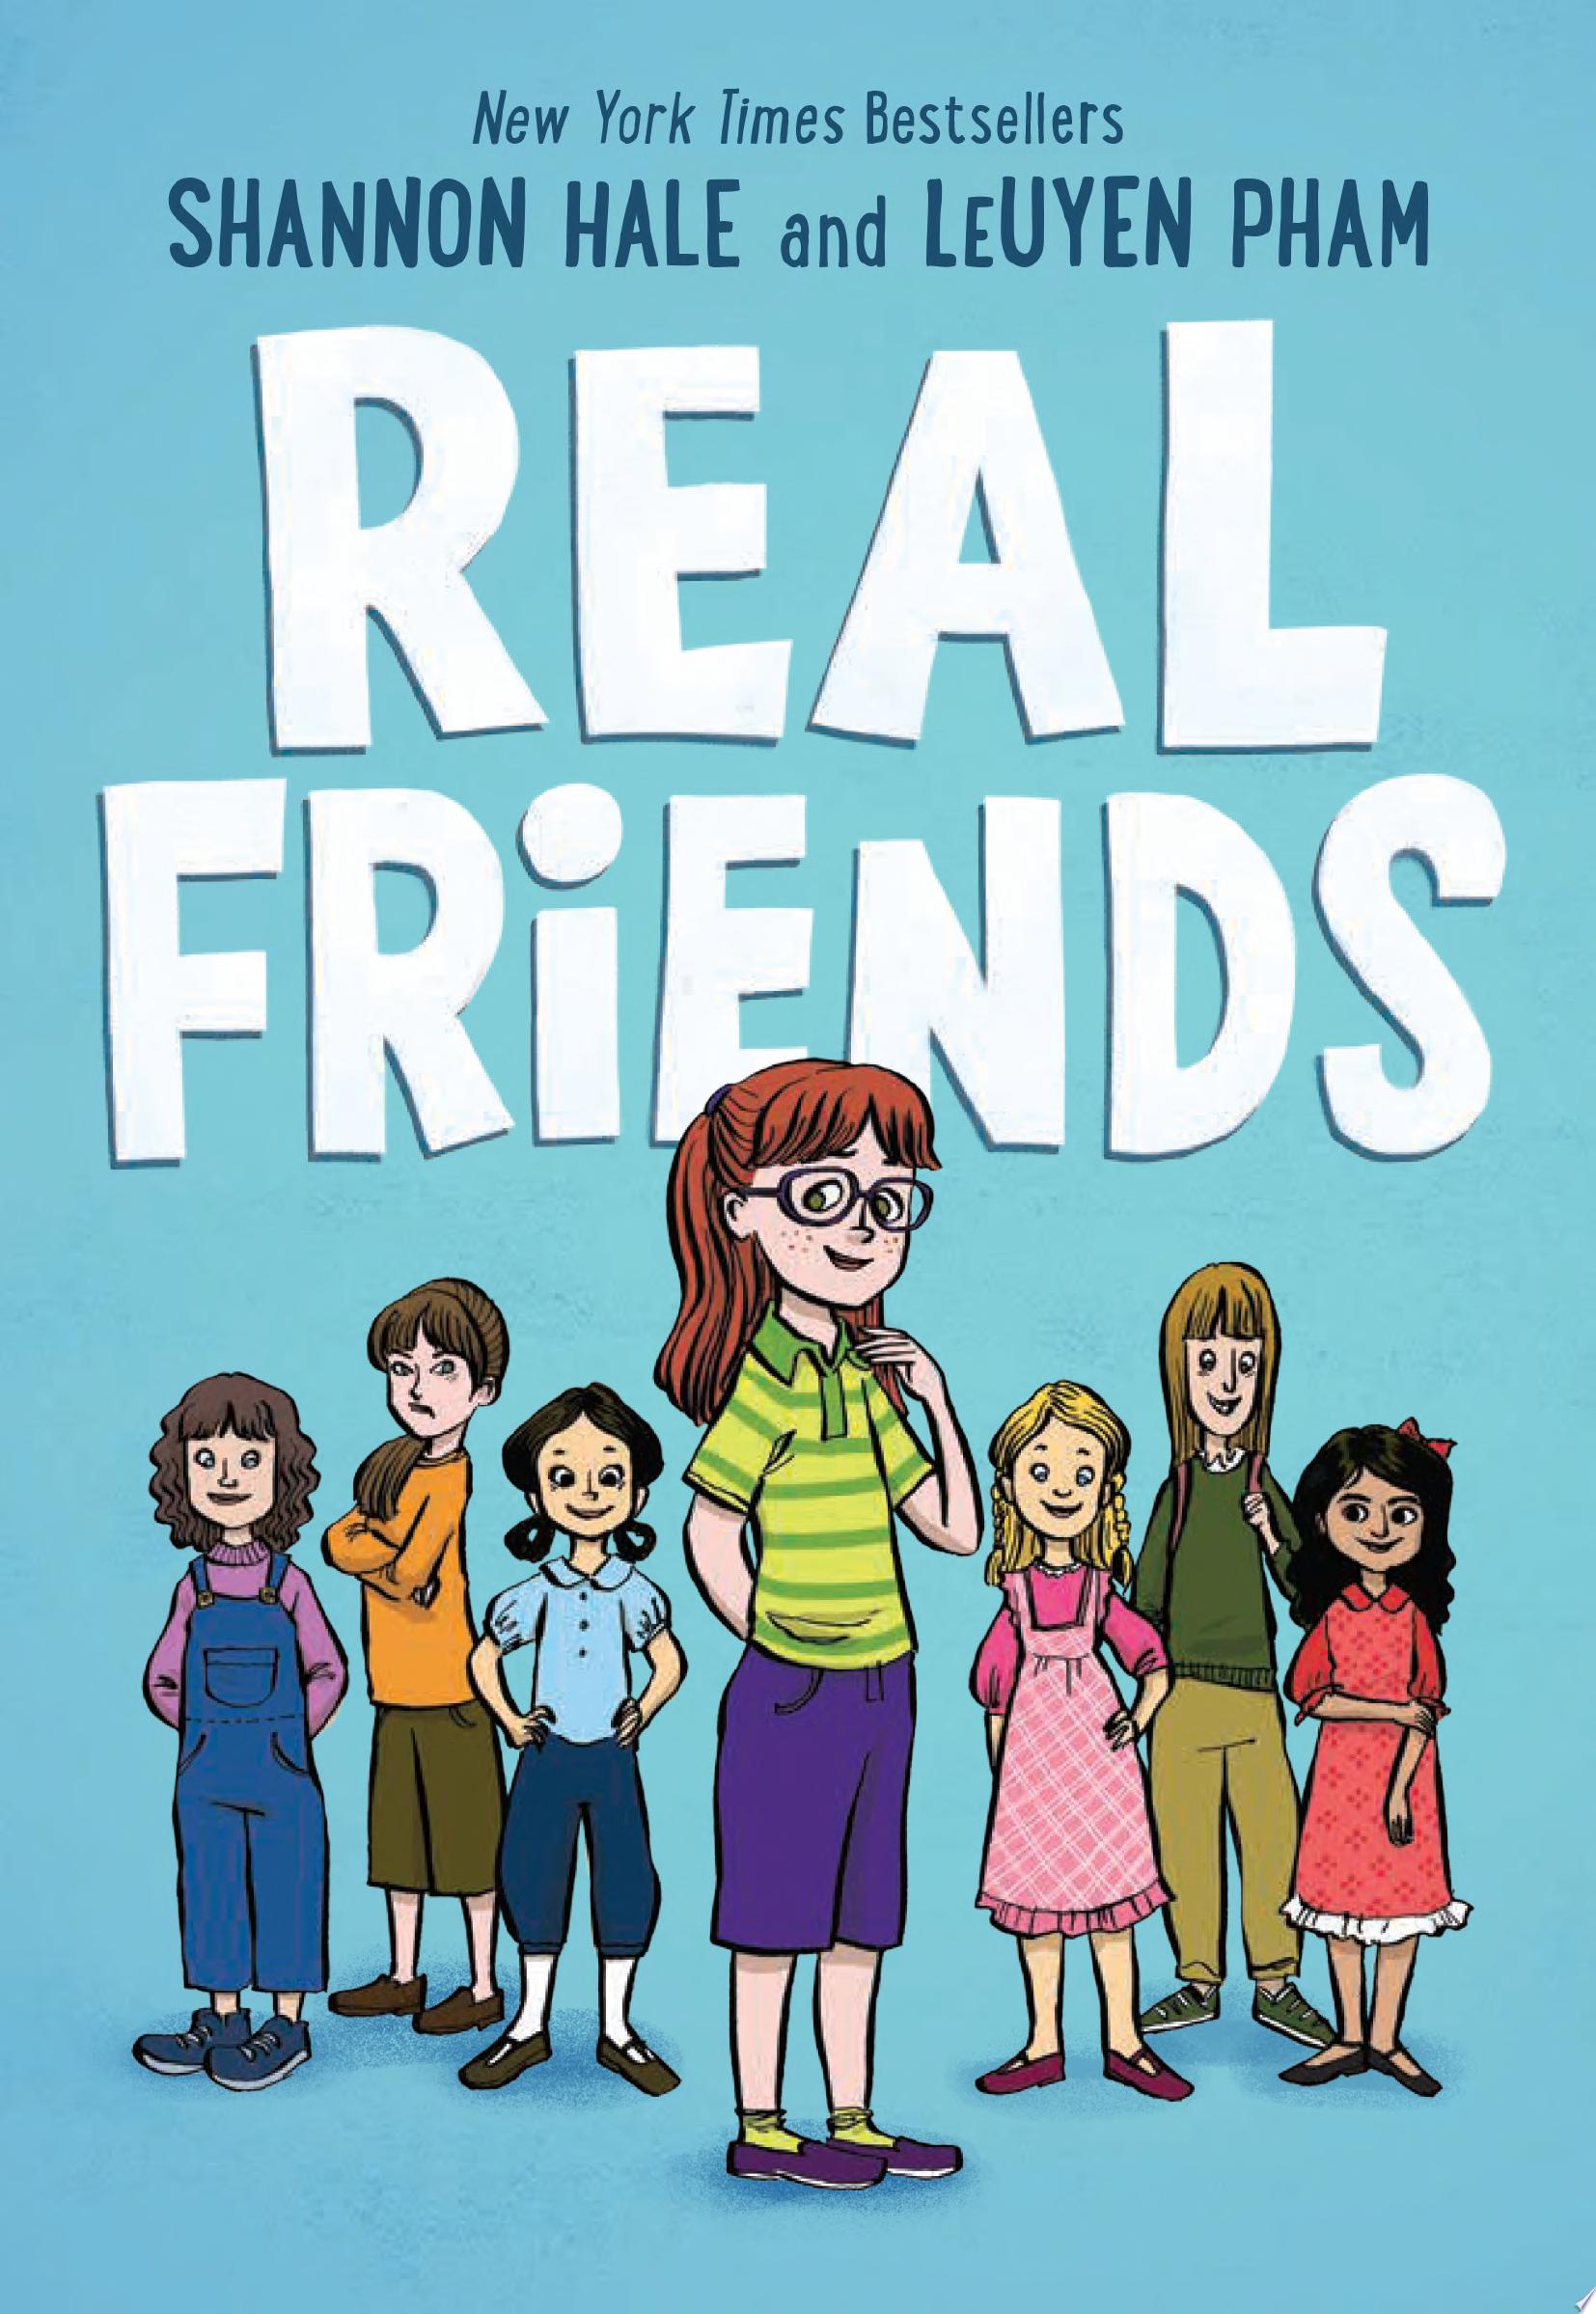 Image for "Real Friends"